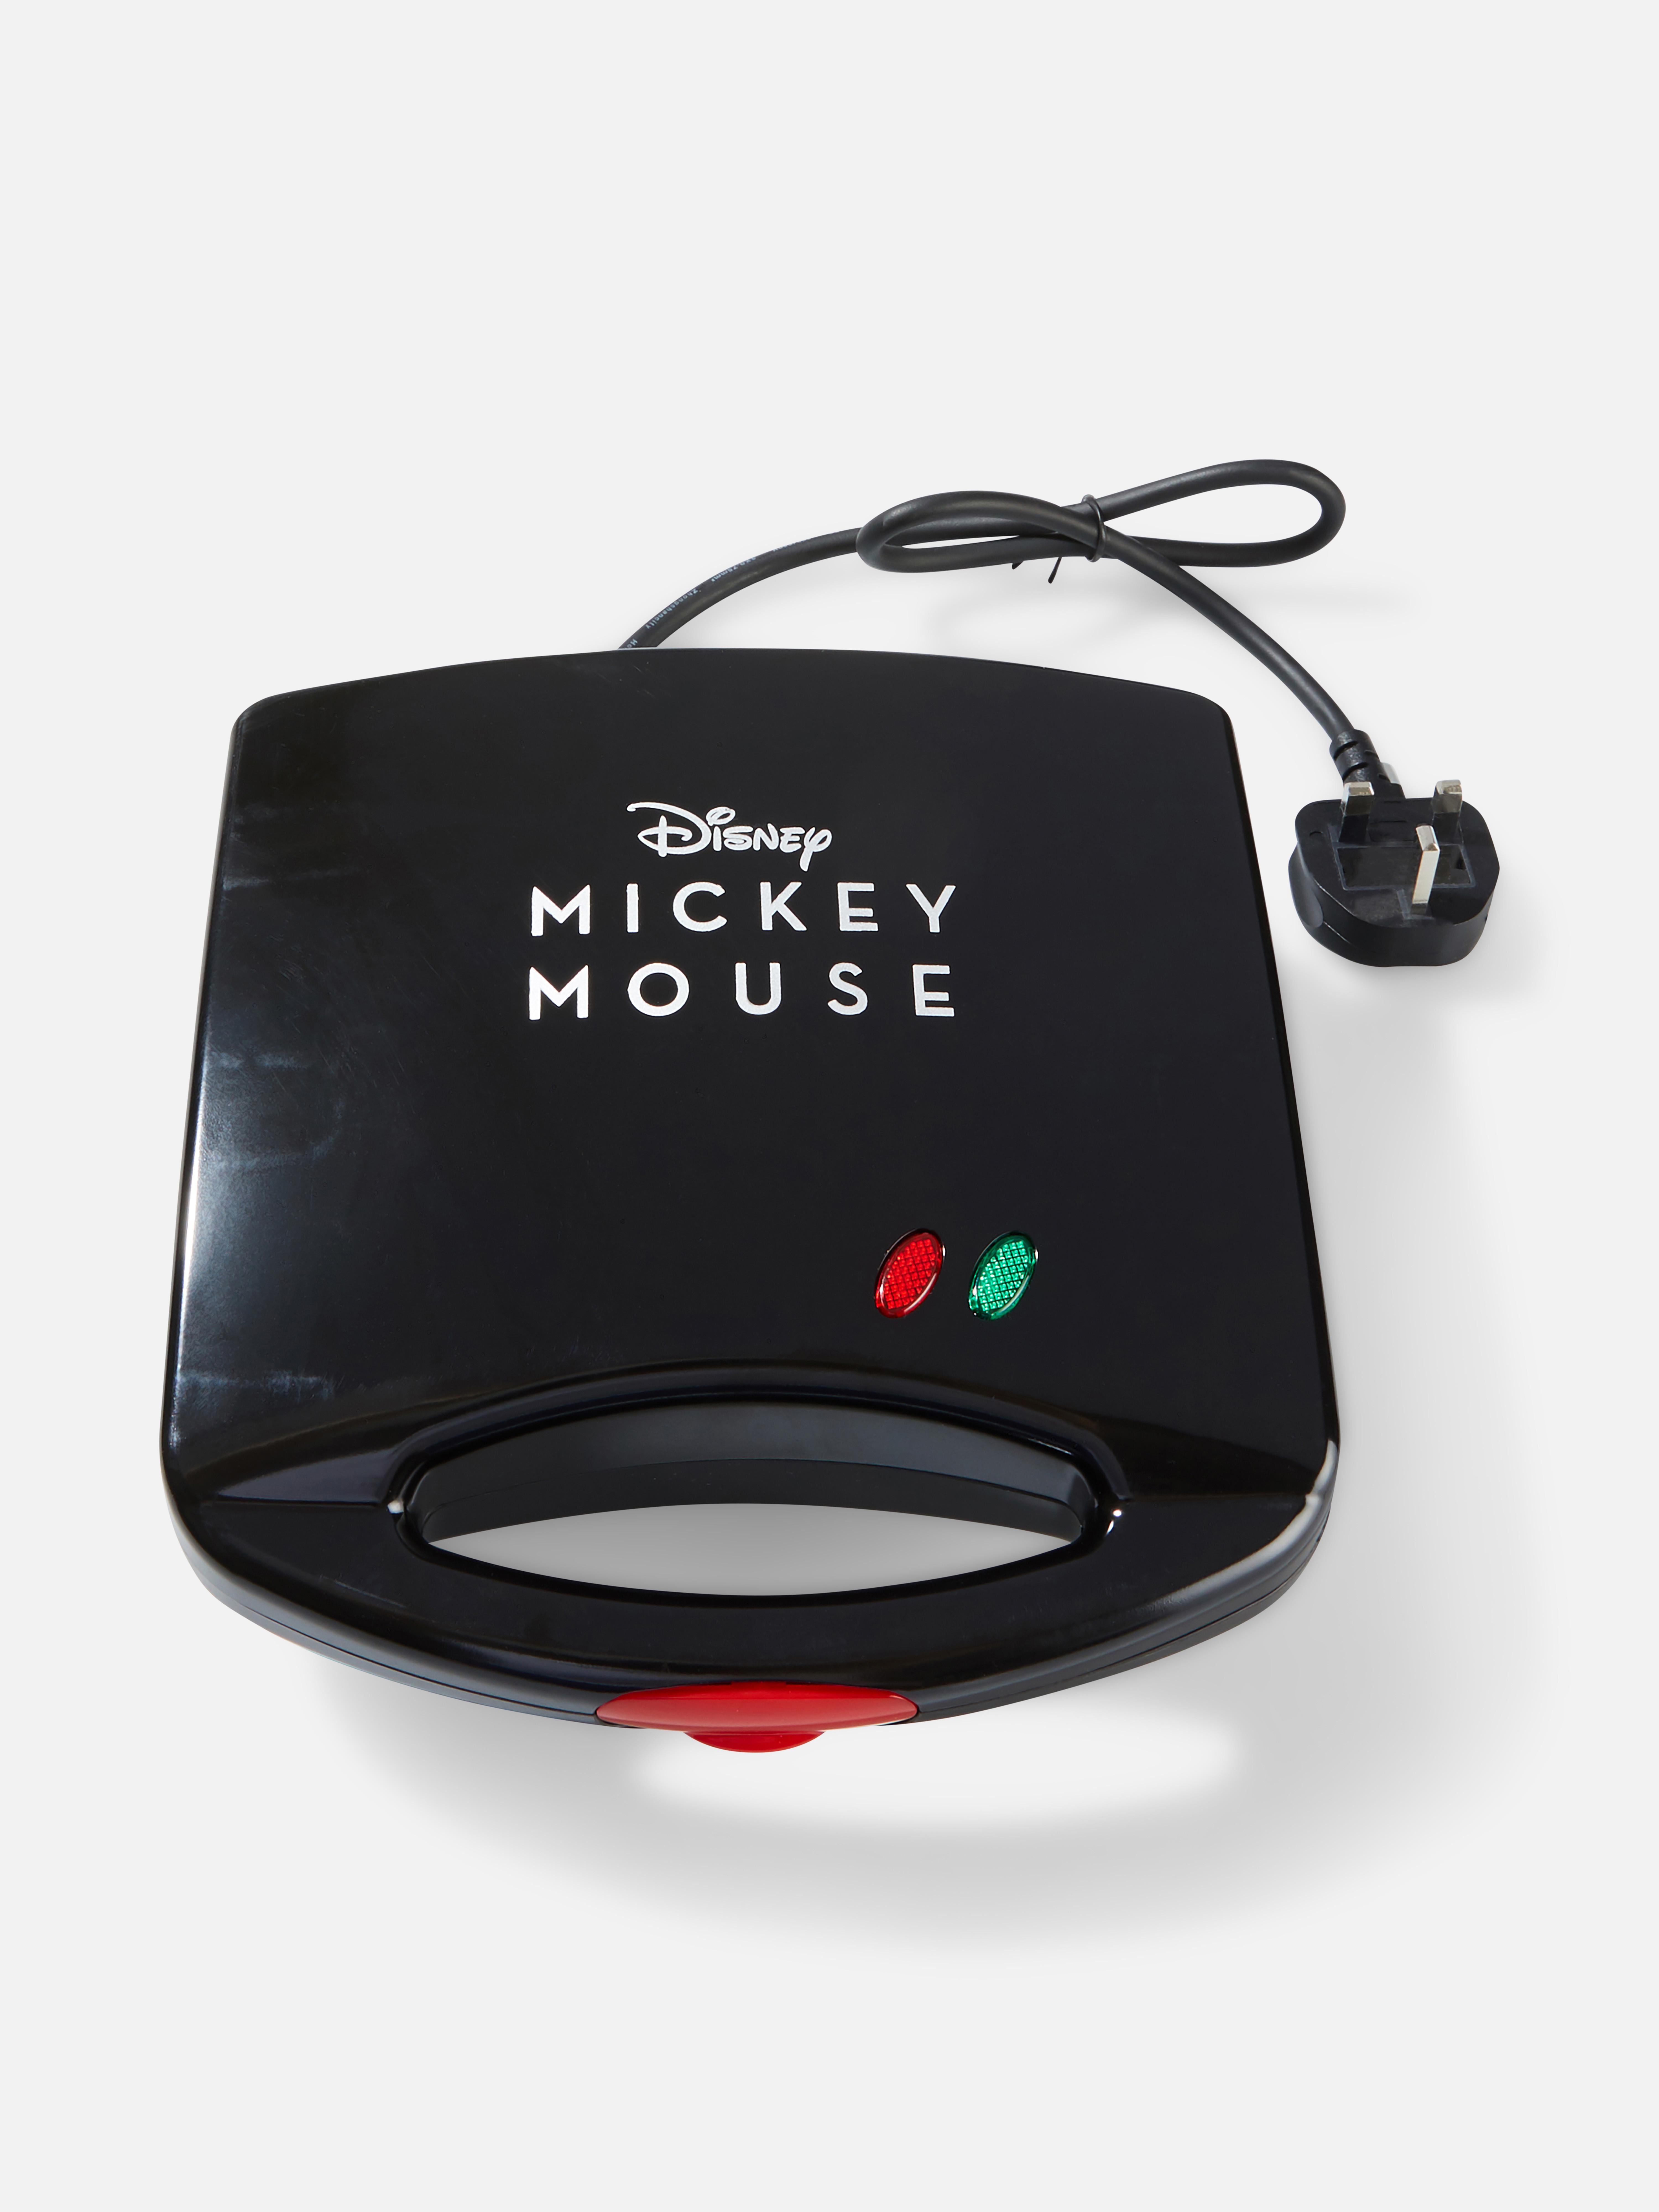 Disney's Mickey Mouse Toasted Sandwich Maker